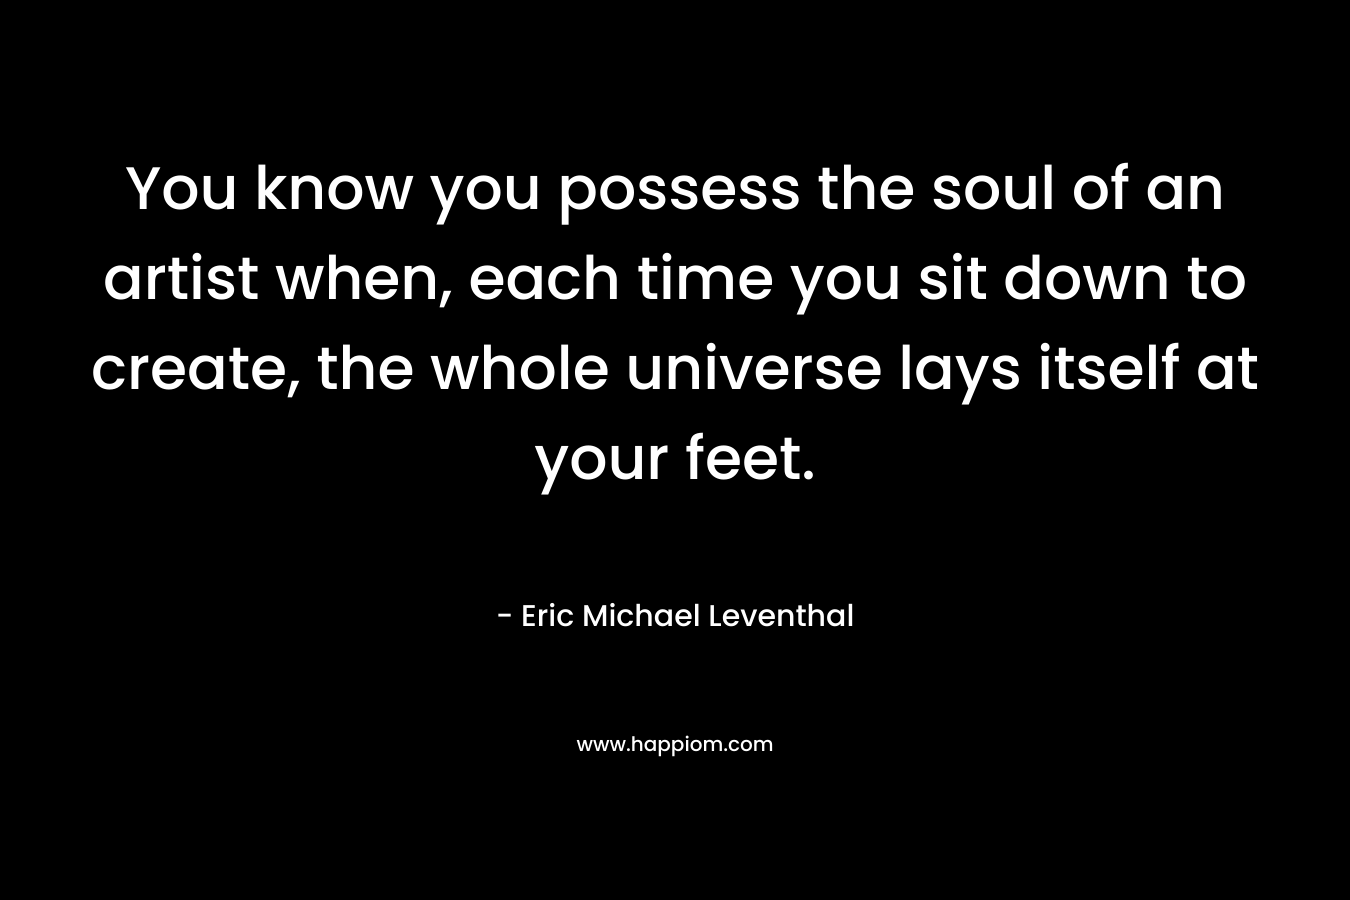 You know you possess the soul of an artist when, each time you sit down to create, the whole universe lays itself at your feet.